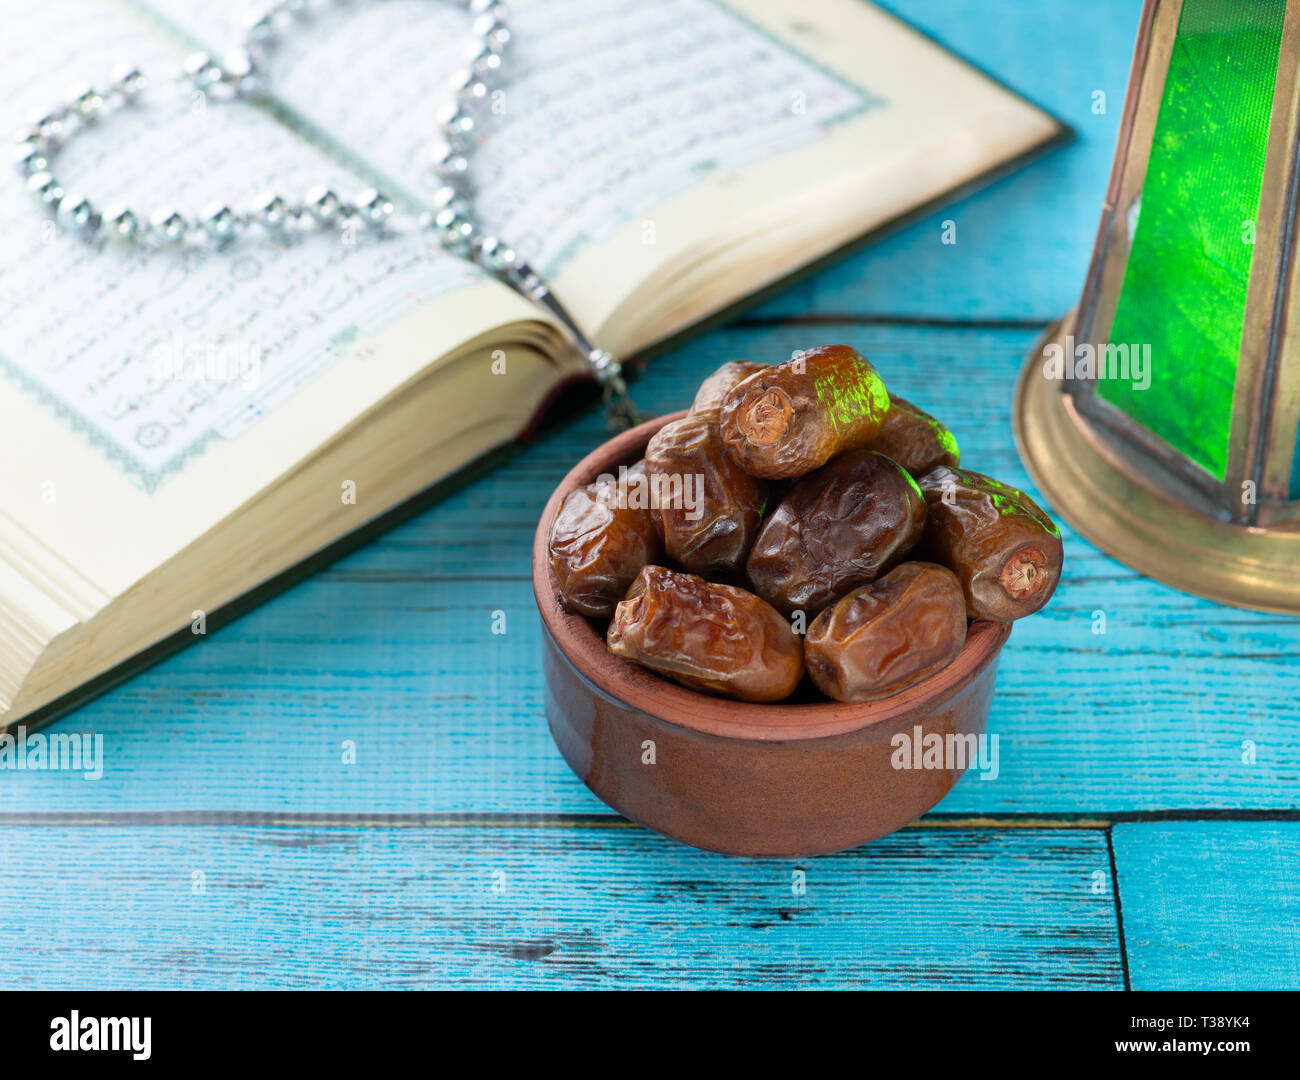 Traditional Objects of Holy Month of Ramadan on Table Stock Photo